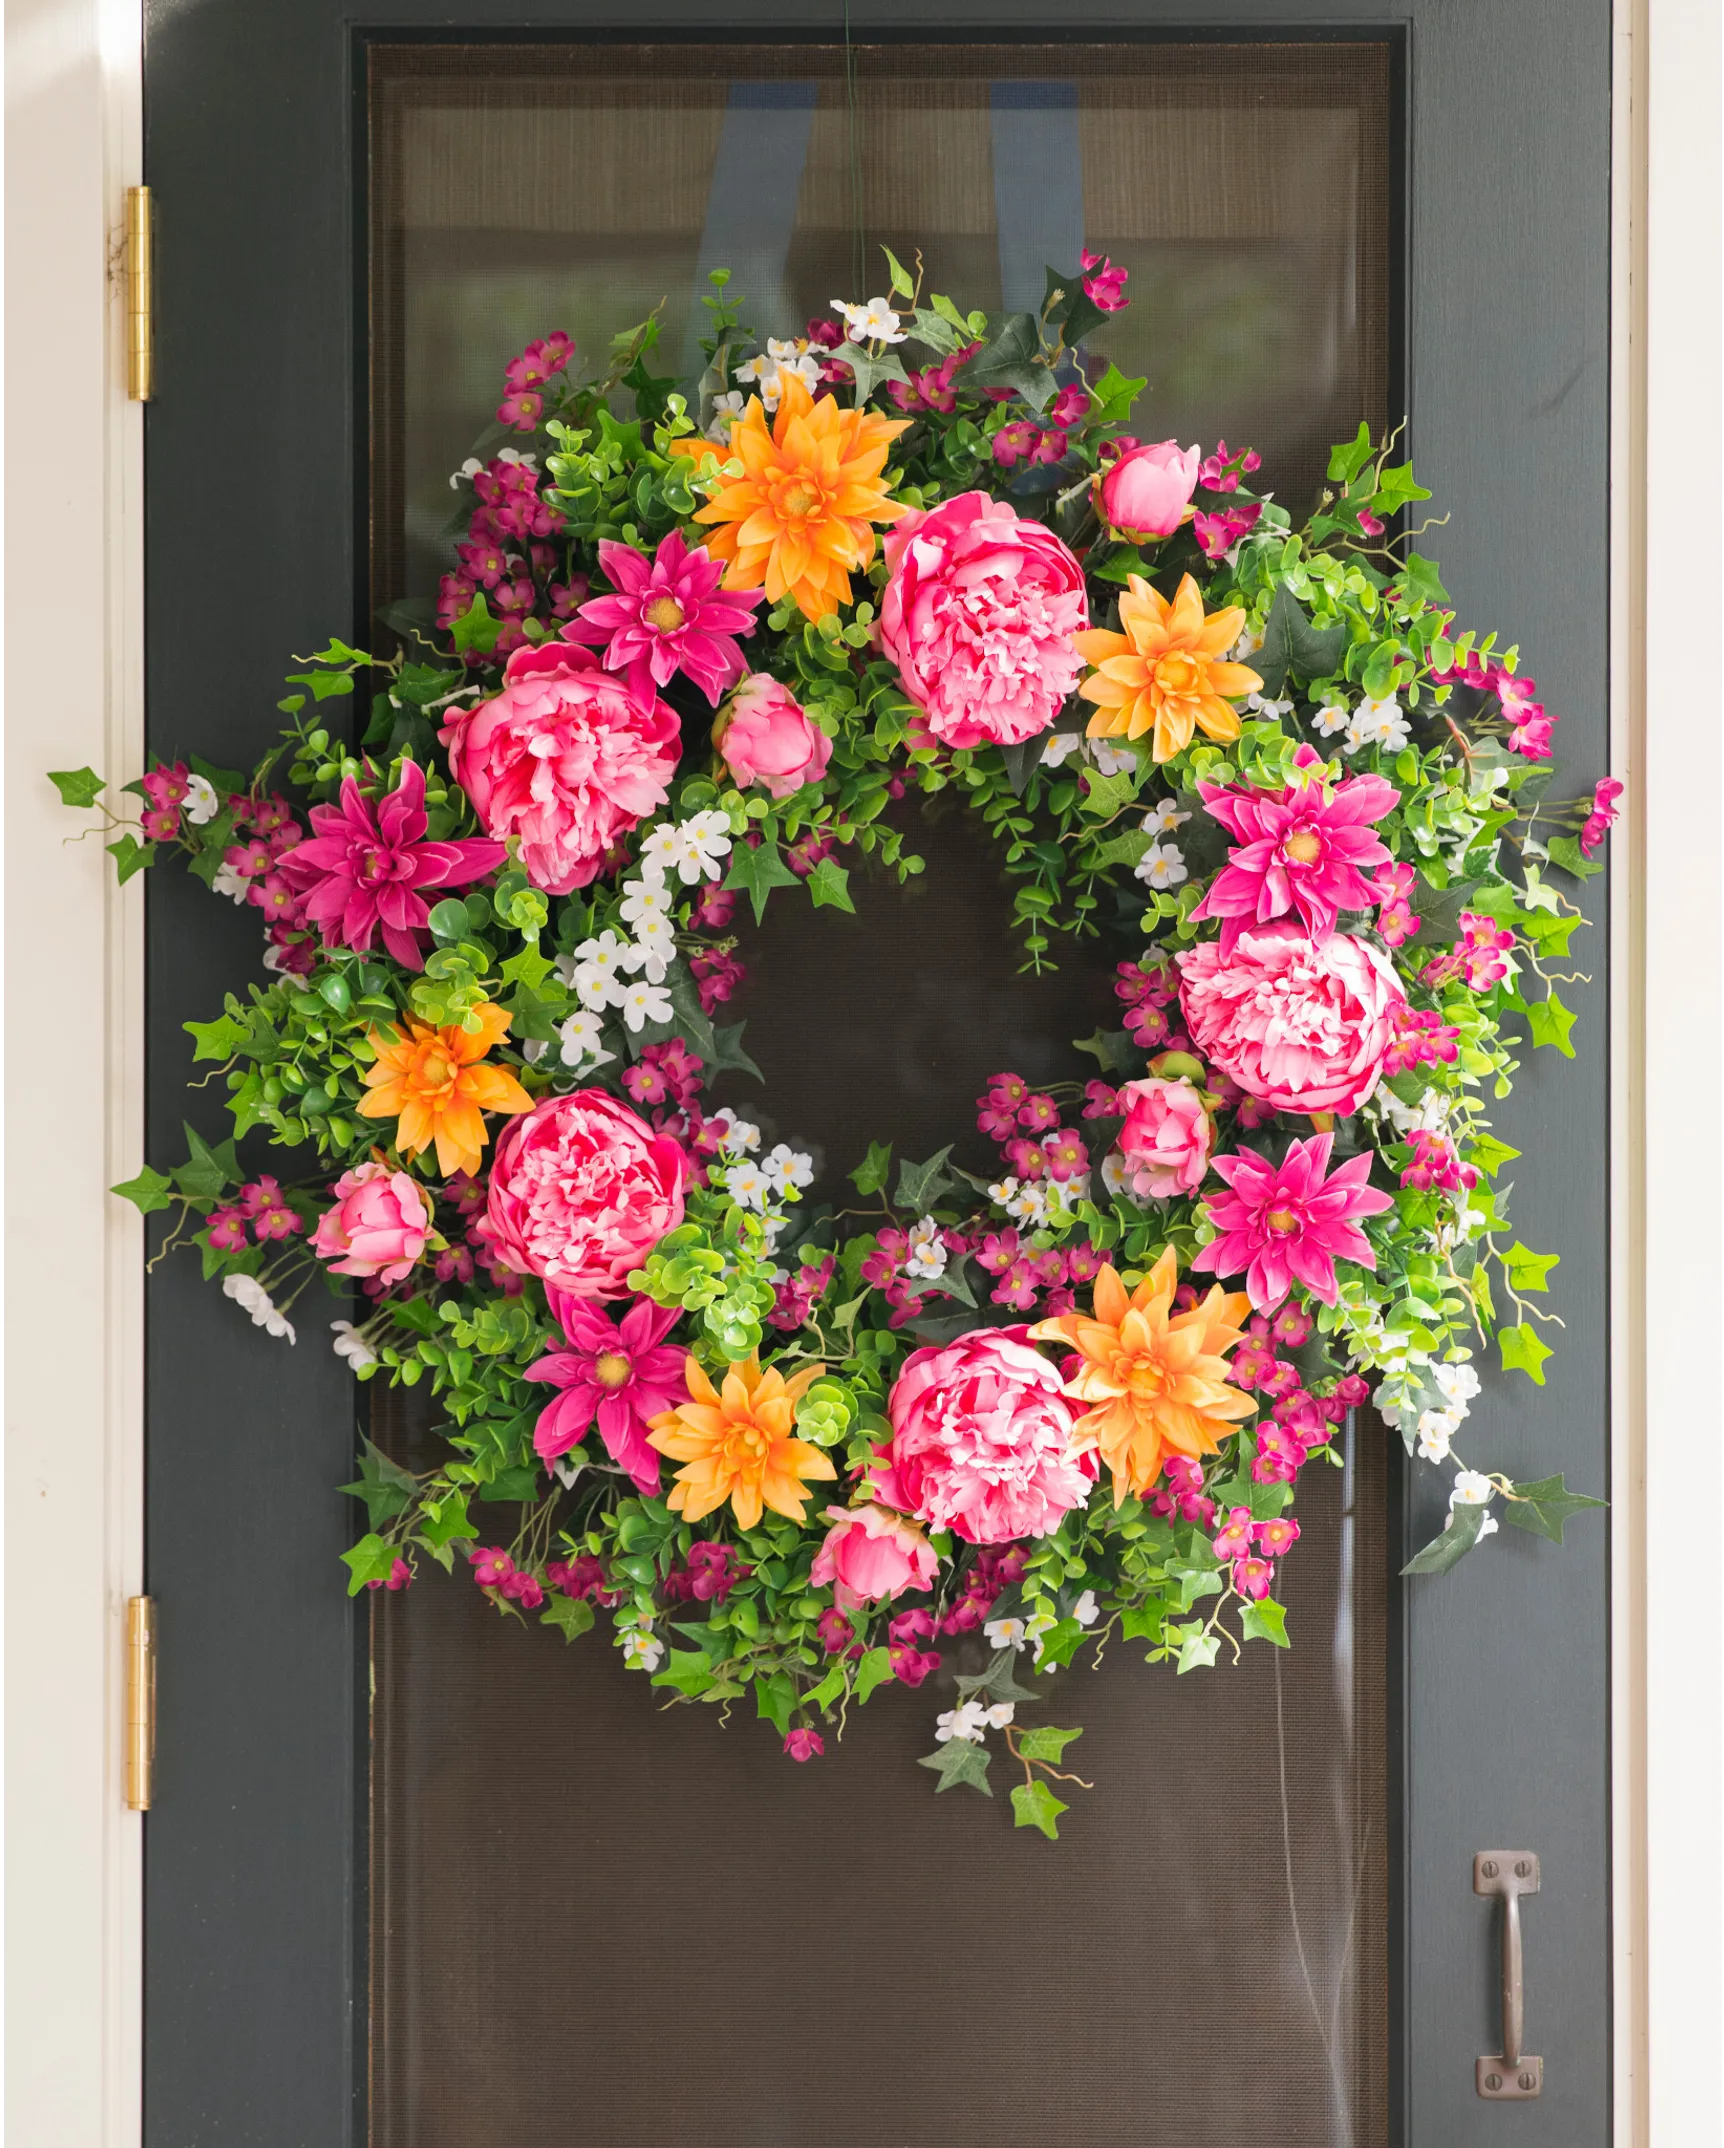 Fall Wreaths for Front Door Peony Wreaths for Door Outside Autumn Wreaths  18 inch Front Door Wreath Spring Wreaths Winter Wreaths for Indoor or Window